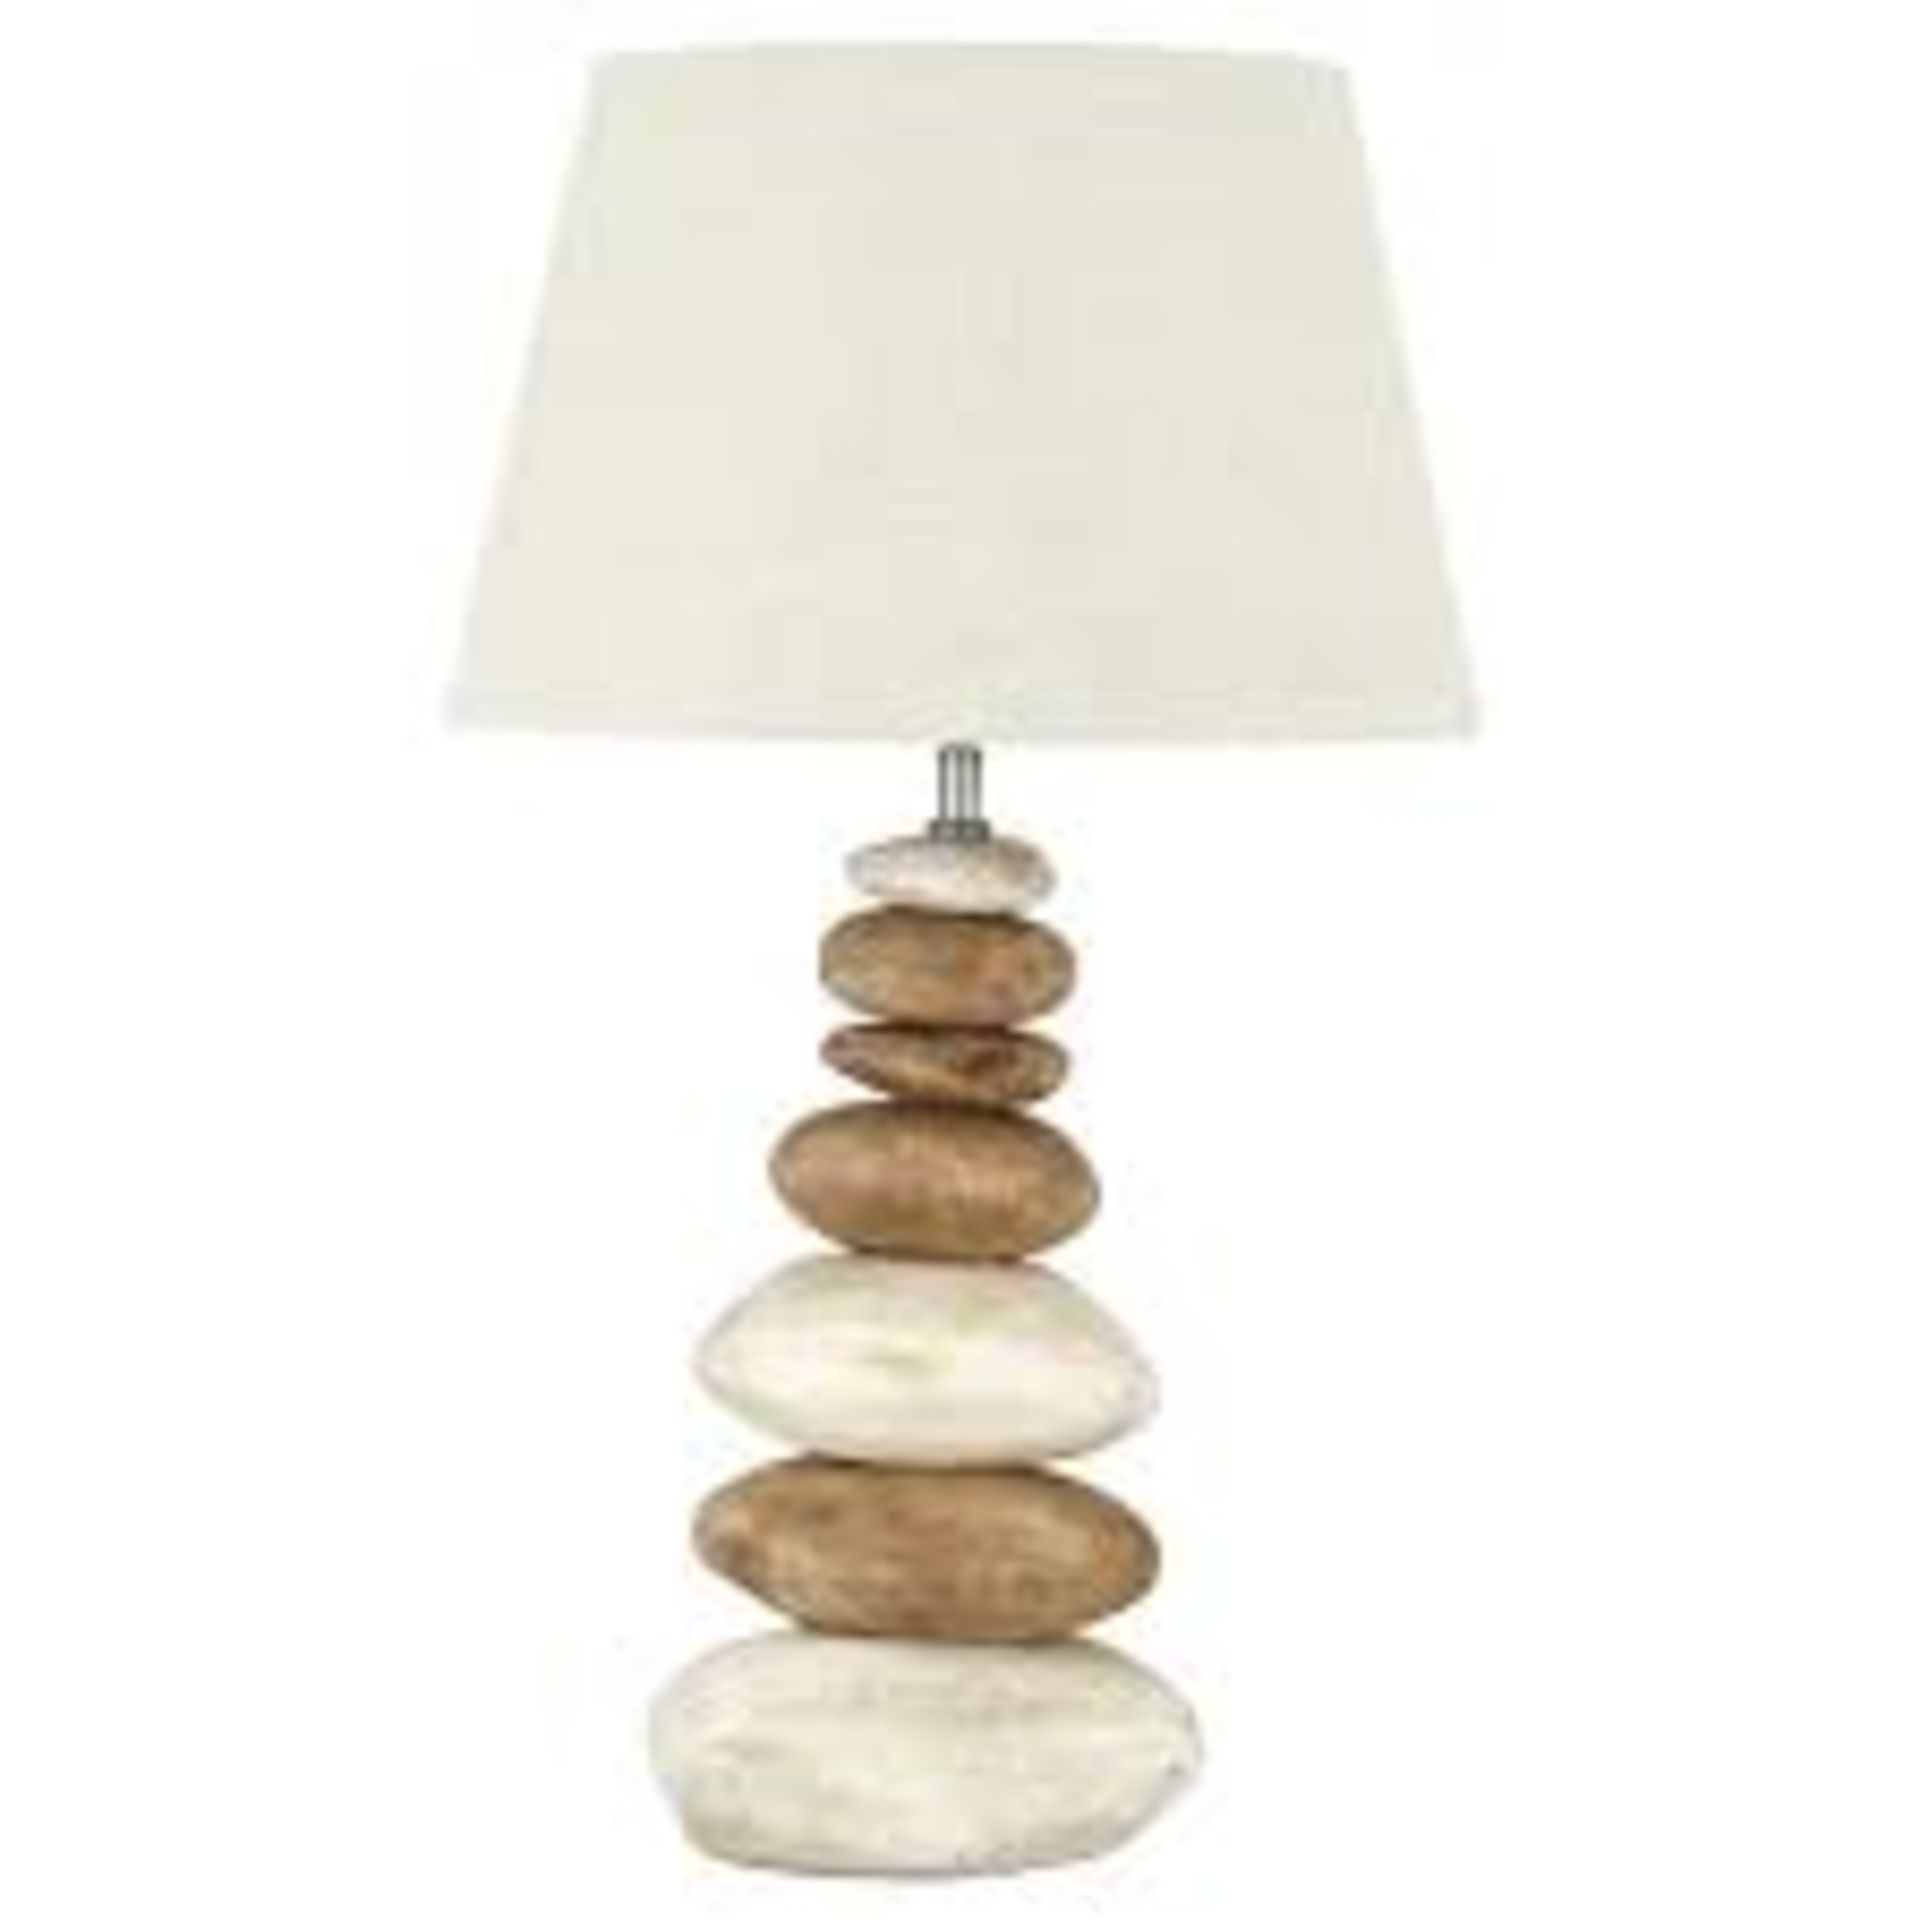 Boxed Pacific Lighting Stacking Pebbles Lisbon Table Lamp RRP £65 (17105) (10.01.20) (Public Viewing